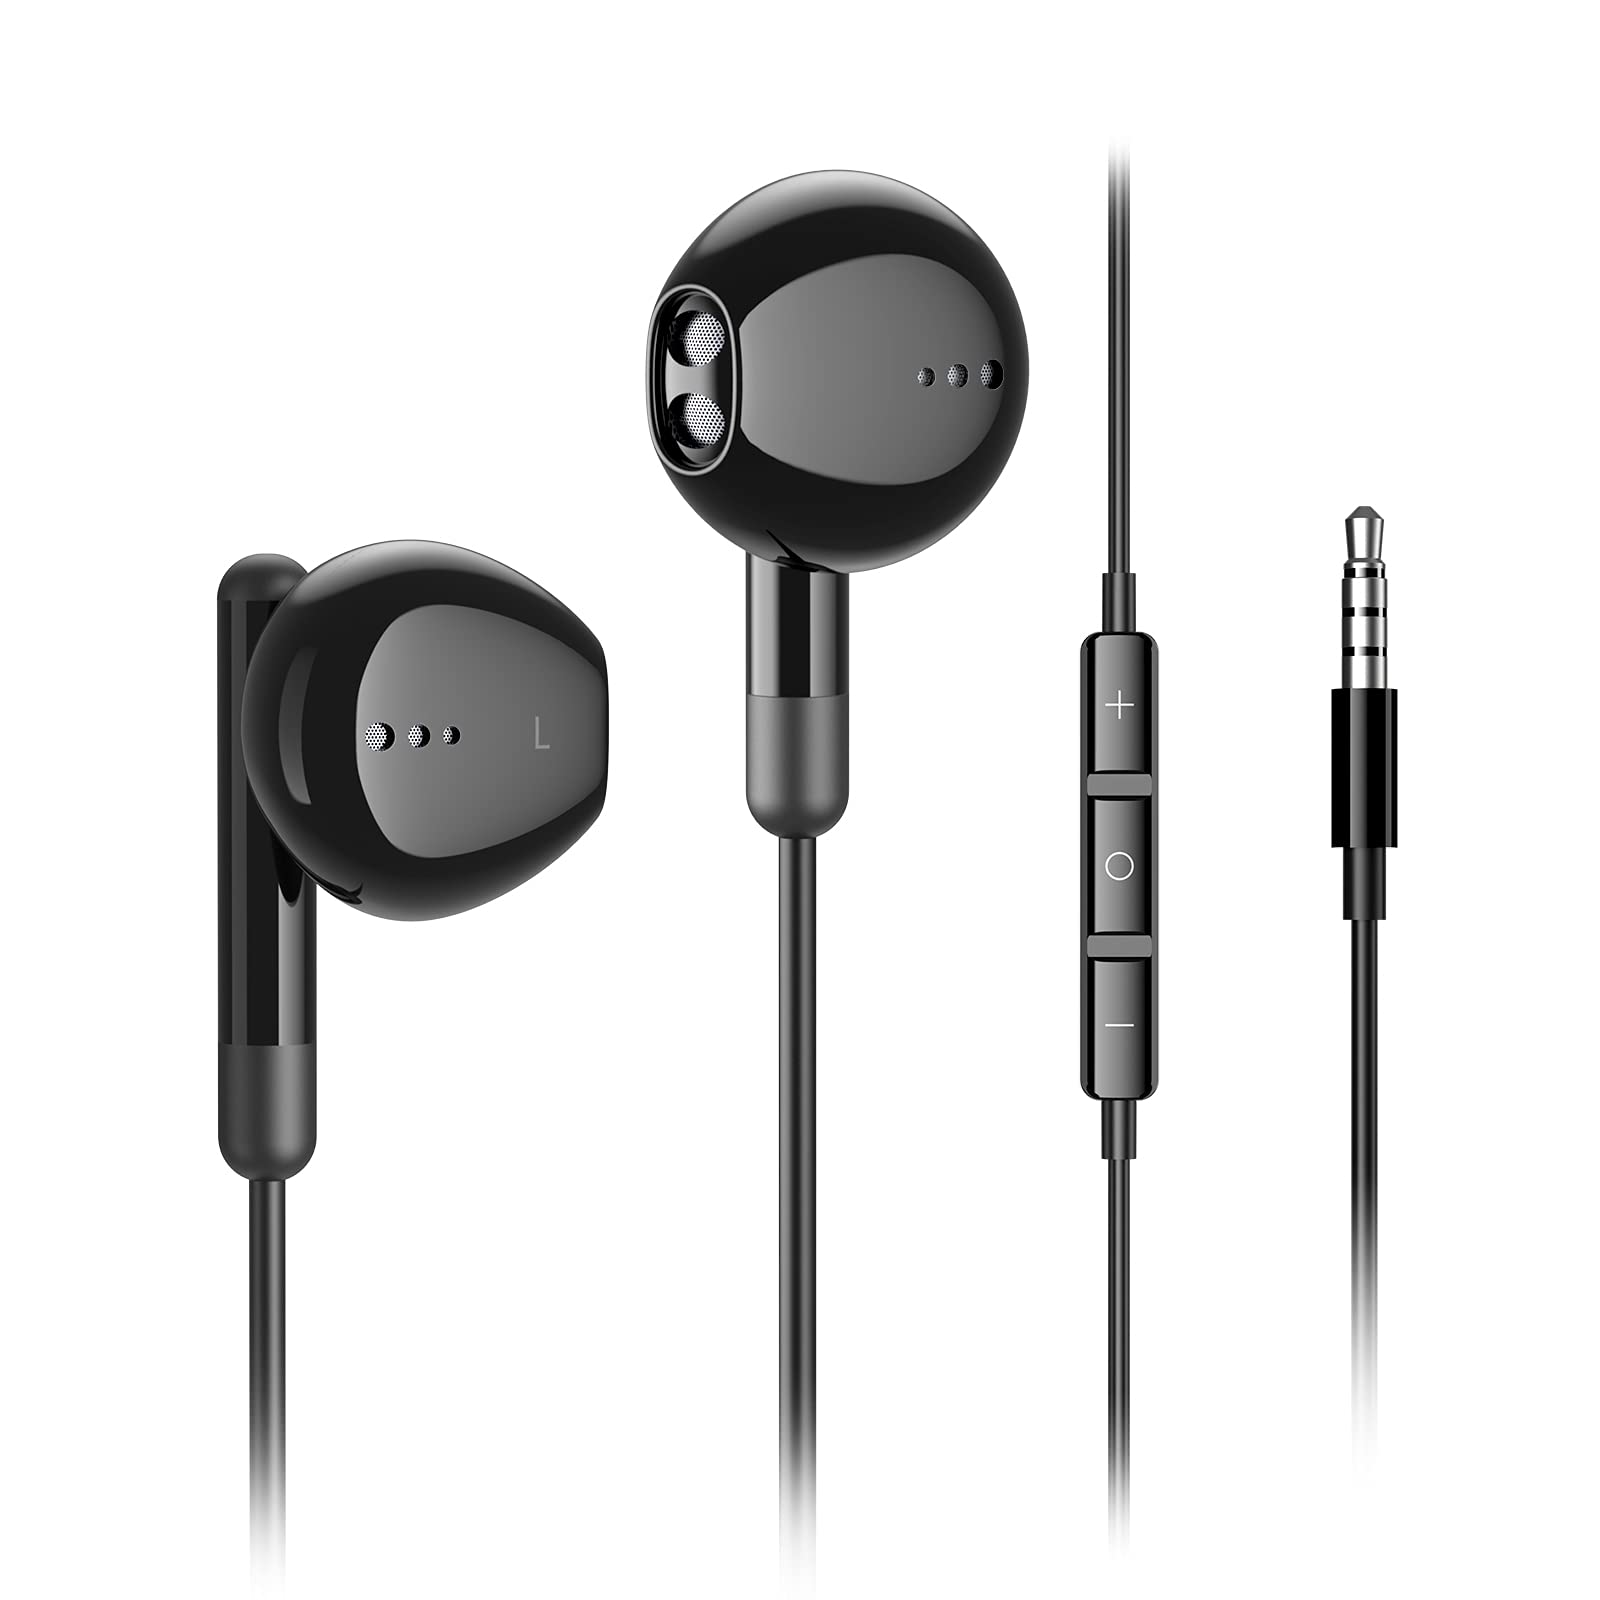  Kimwood Wired Earbuds with Microphone,  Wired Earphones in-Ear Headphones HiFi Stereo, Powerful Bass and Crystal Clear Audio, Compatible with iPhone, iPad, Android, Computer Most with 3.5mm Jack(Black)...